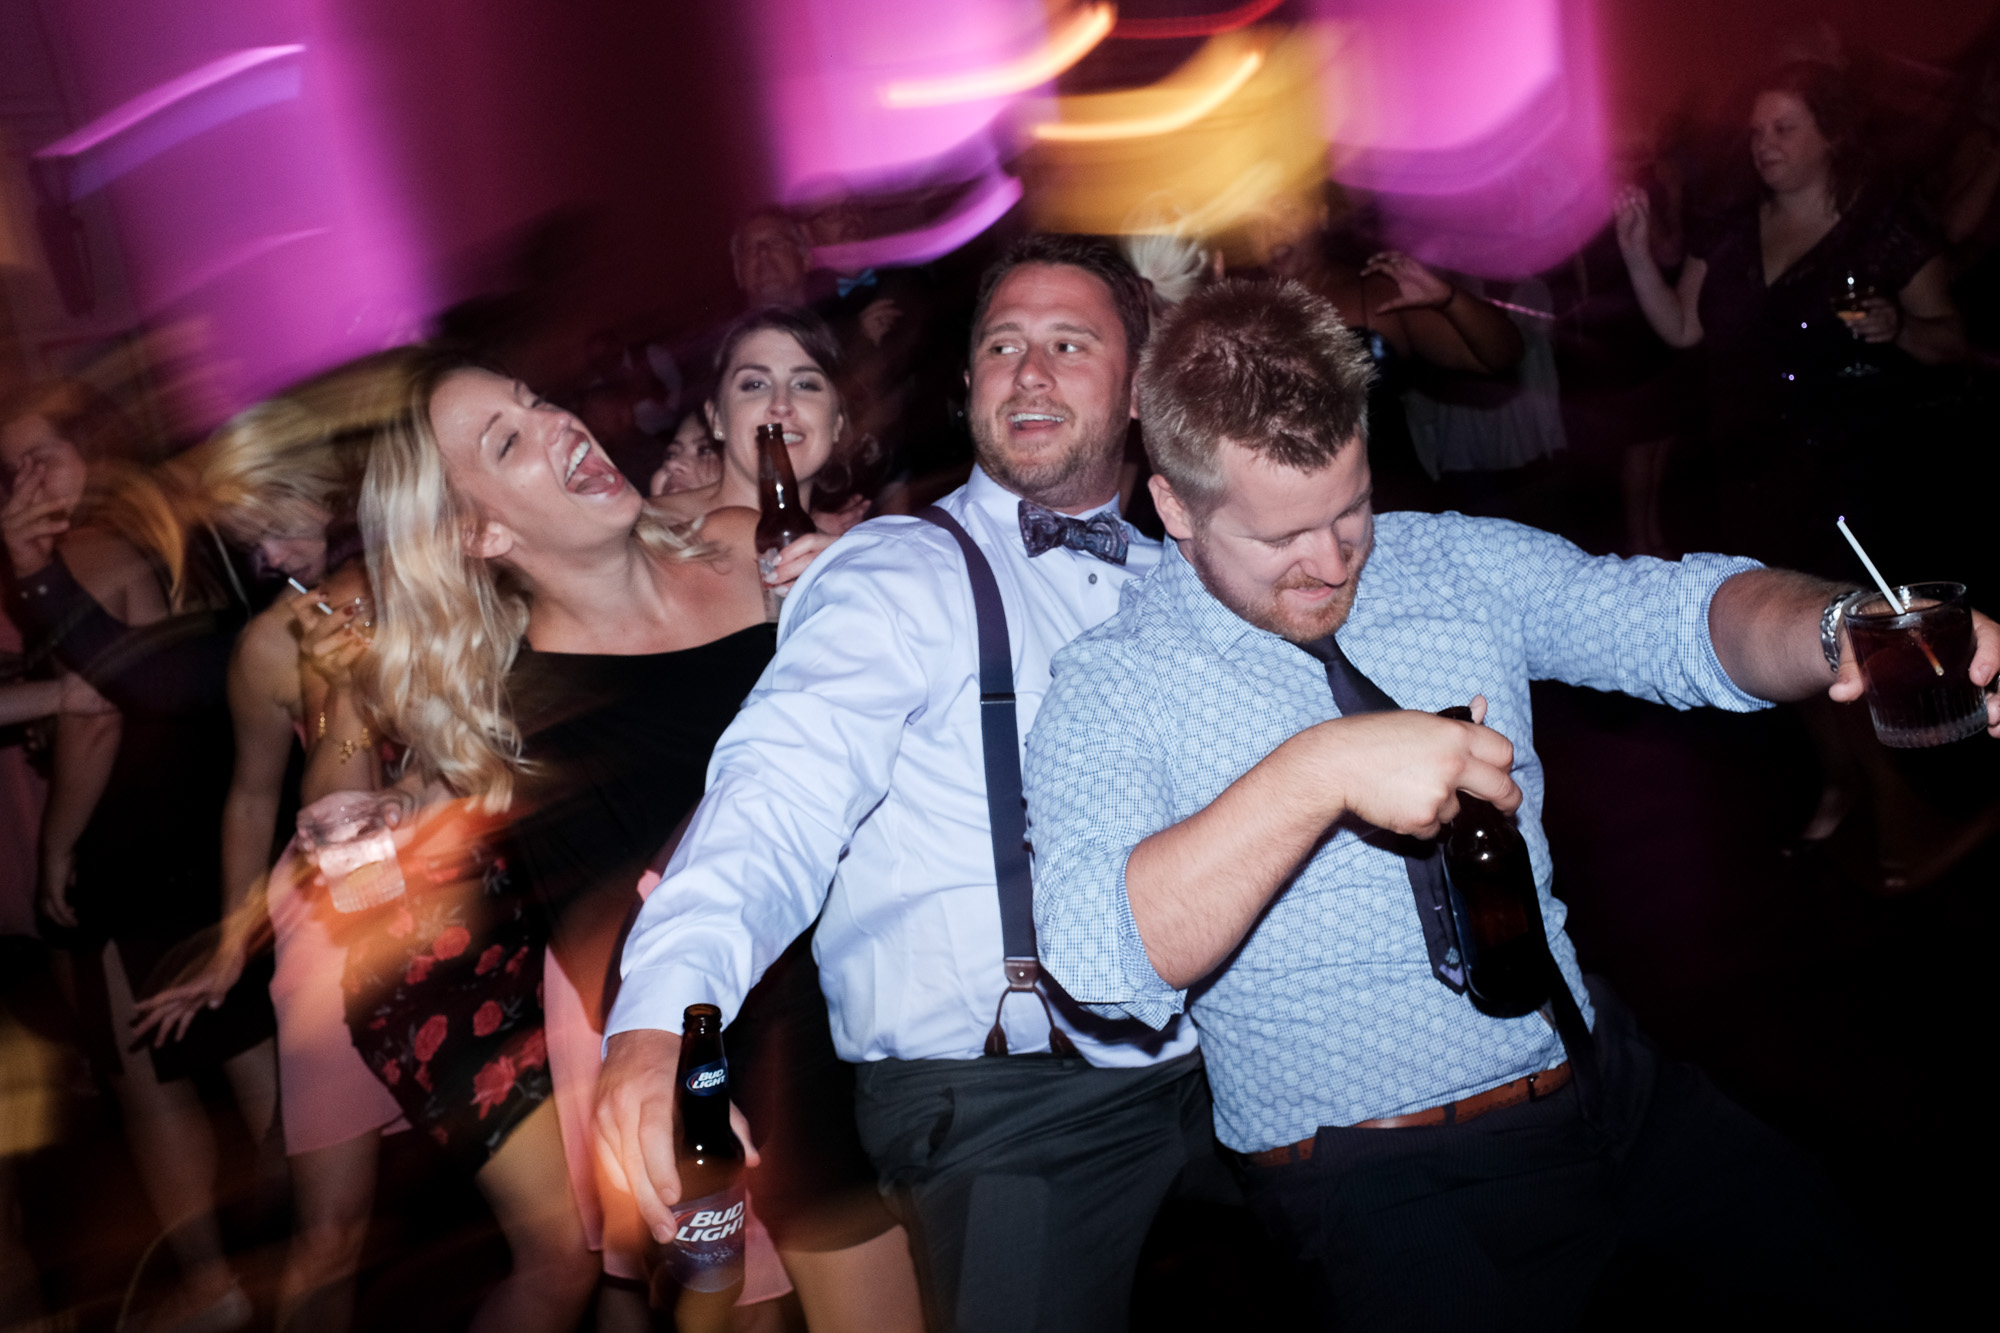  Guests enjoy the party and the dance floor at Melanie &amp; David's wedding reception at the Toscana in Toronto.&nbsp; 